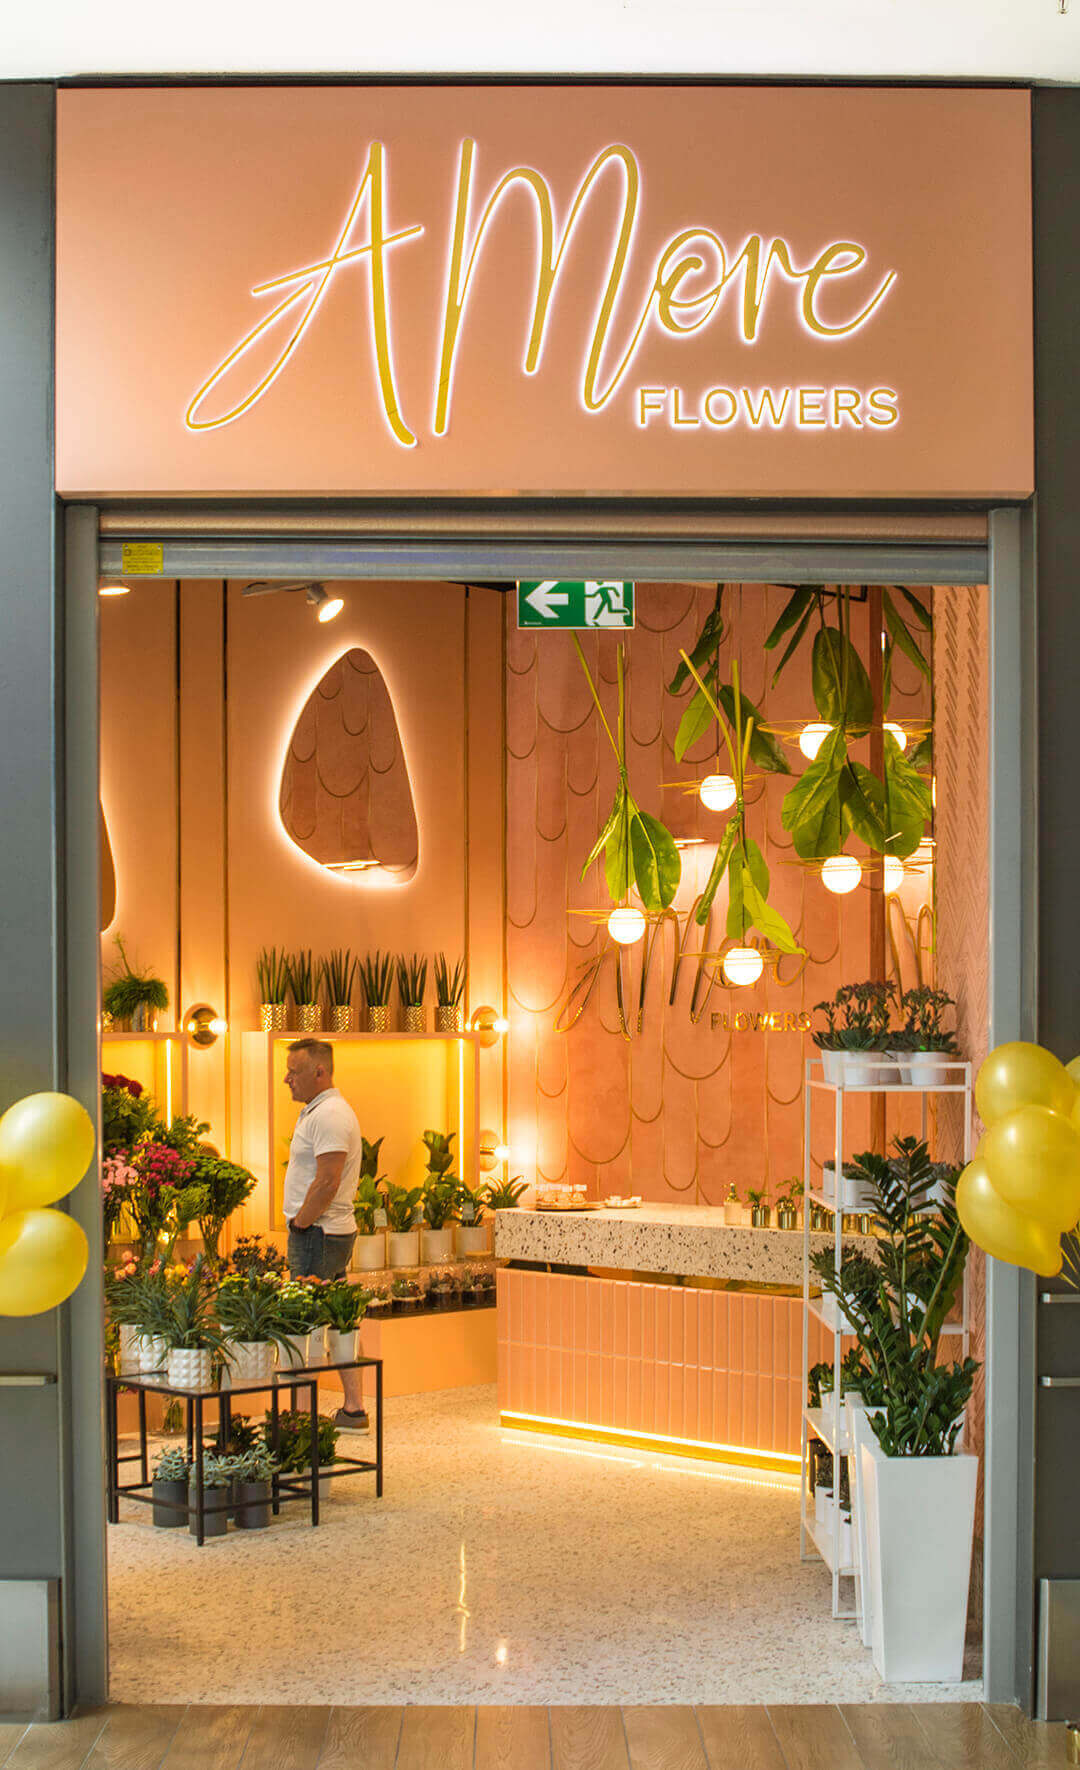 amore flower amor flaver - amore-flowers-casette-gdynia-riviera-casette-gold-letters-lit-coffer-casette-over-store-casette-over-the-morellow-florist-entrance (11) 